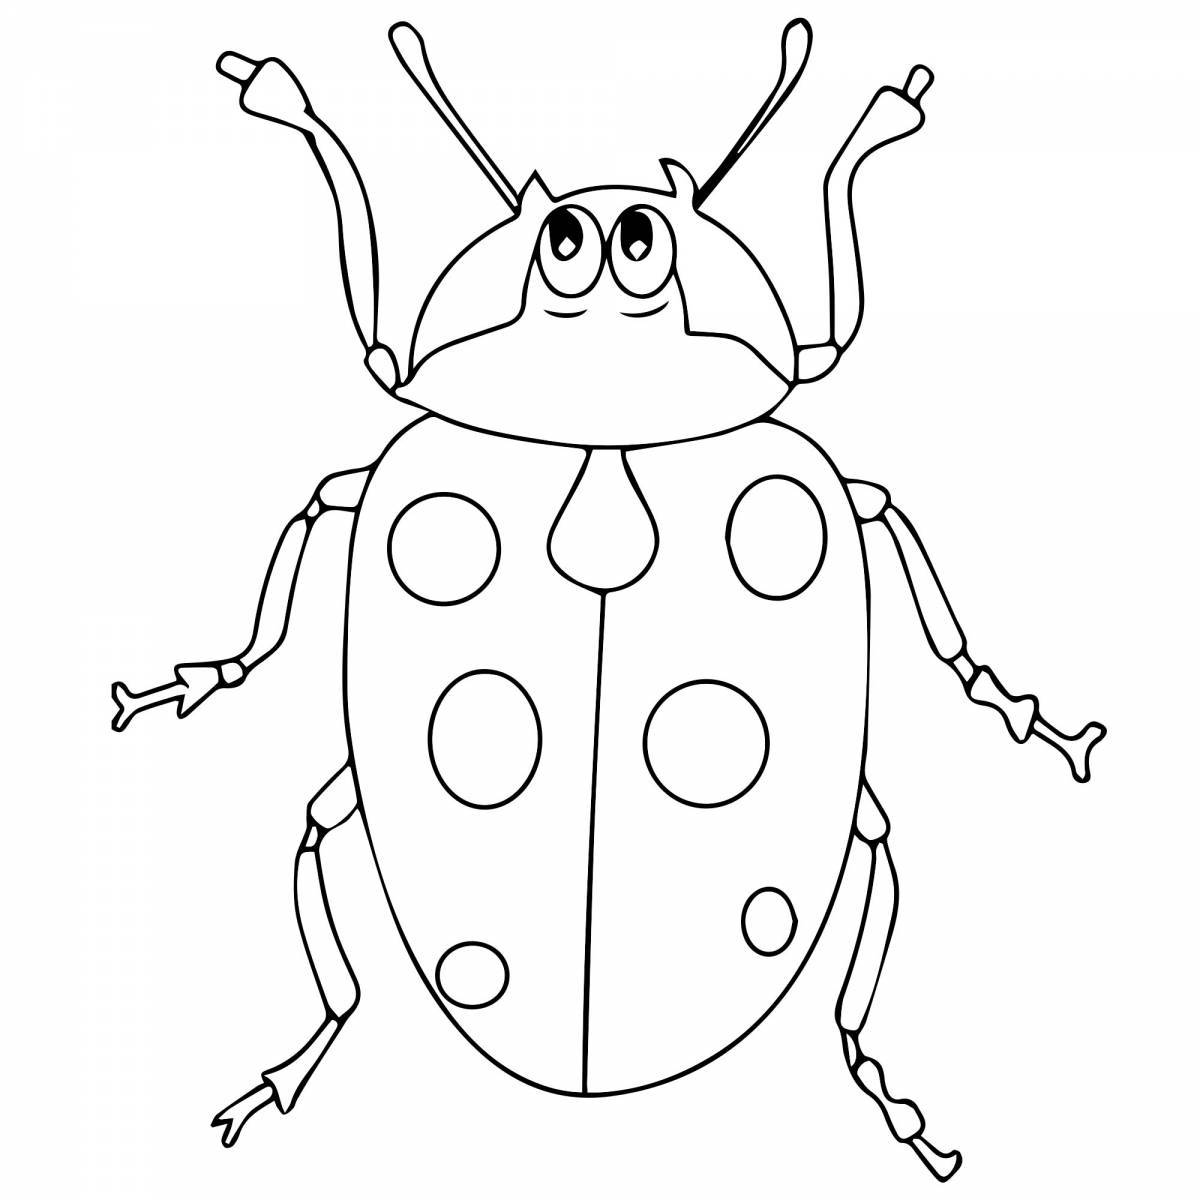 Living beetle coloring book for kids